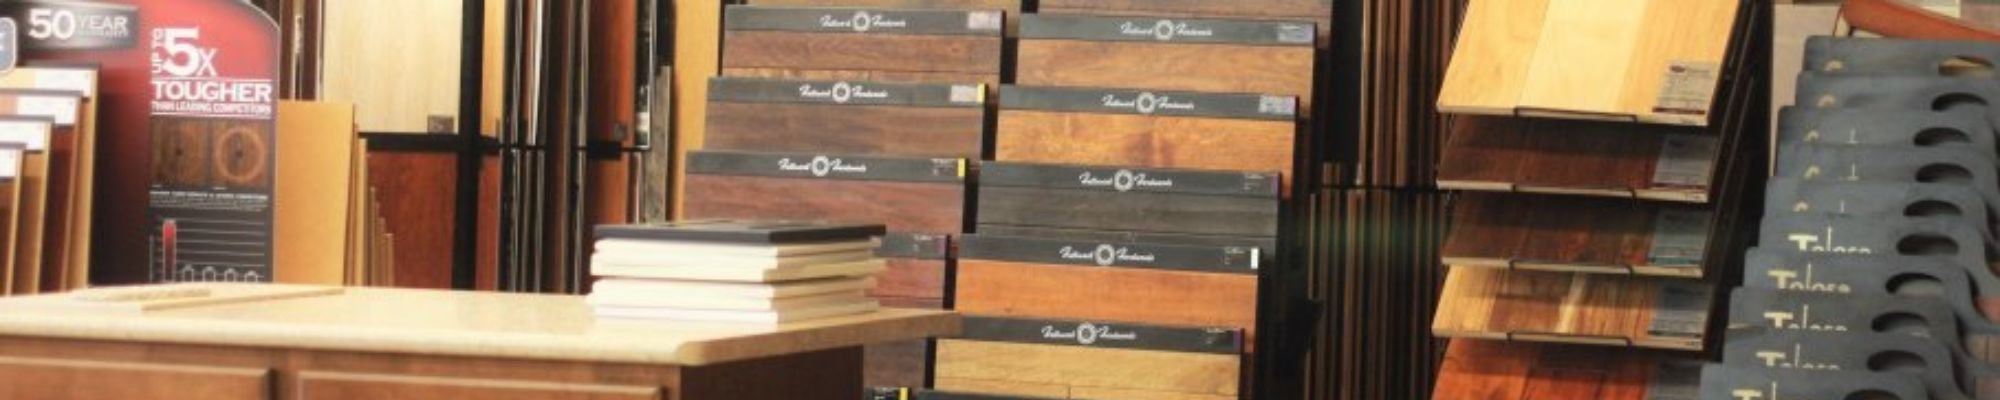 hardwood flooring showroom from Specialty Shoppe Floors and More Inc in Fort Morgan